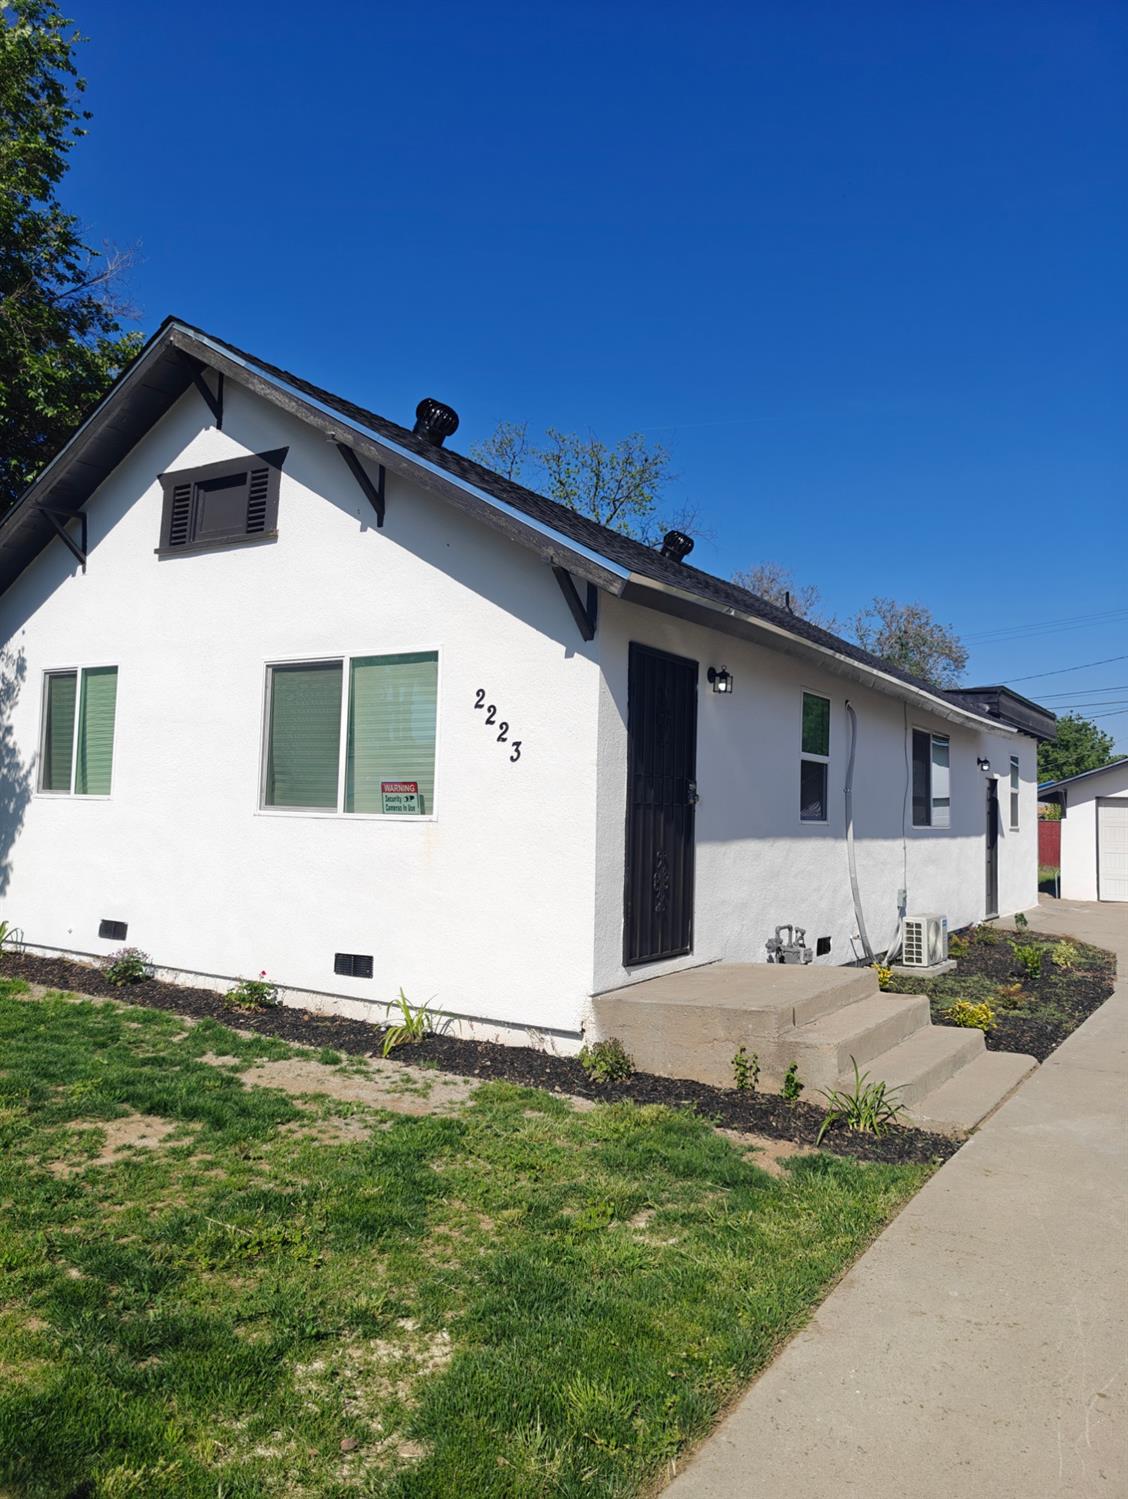 Photo of 2223 S Ivy Ave in Fresno, CA